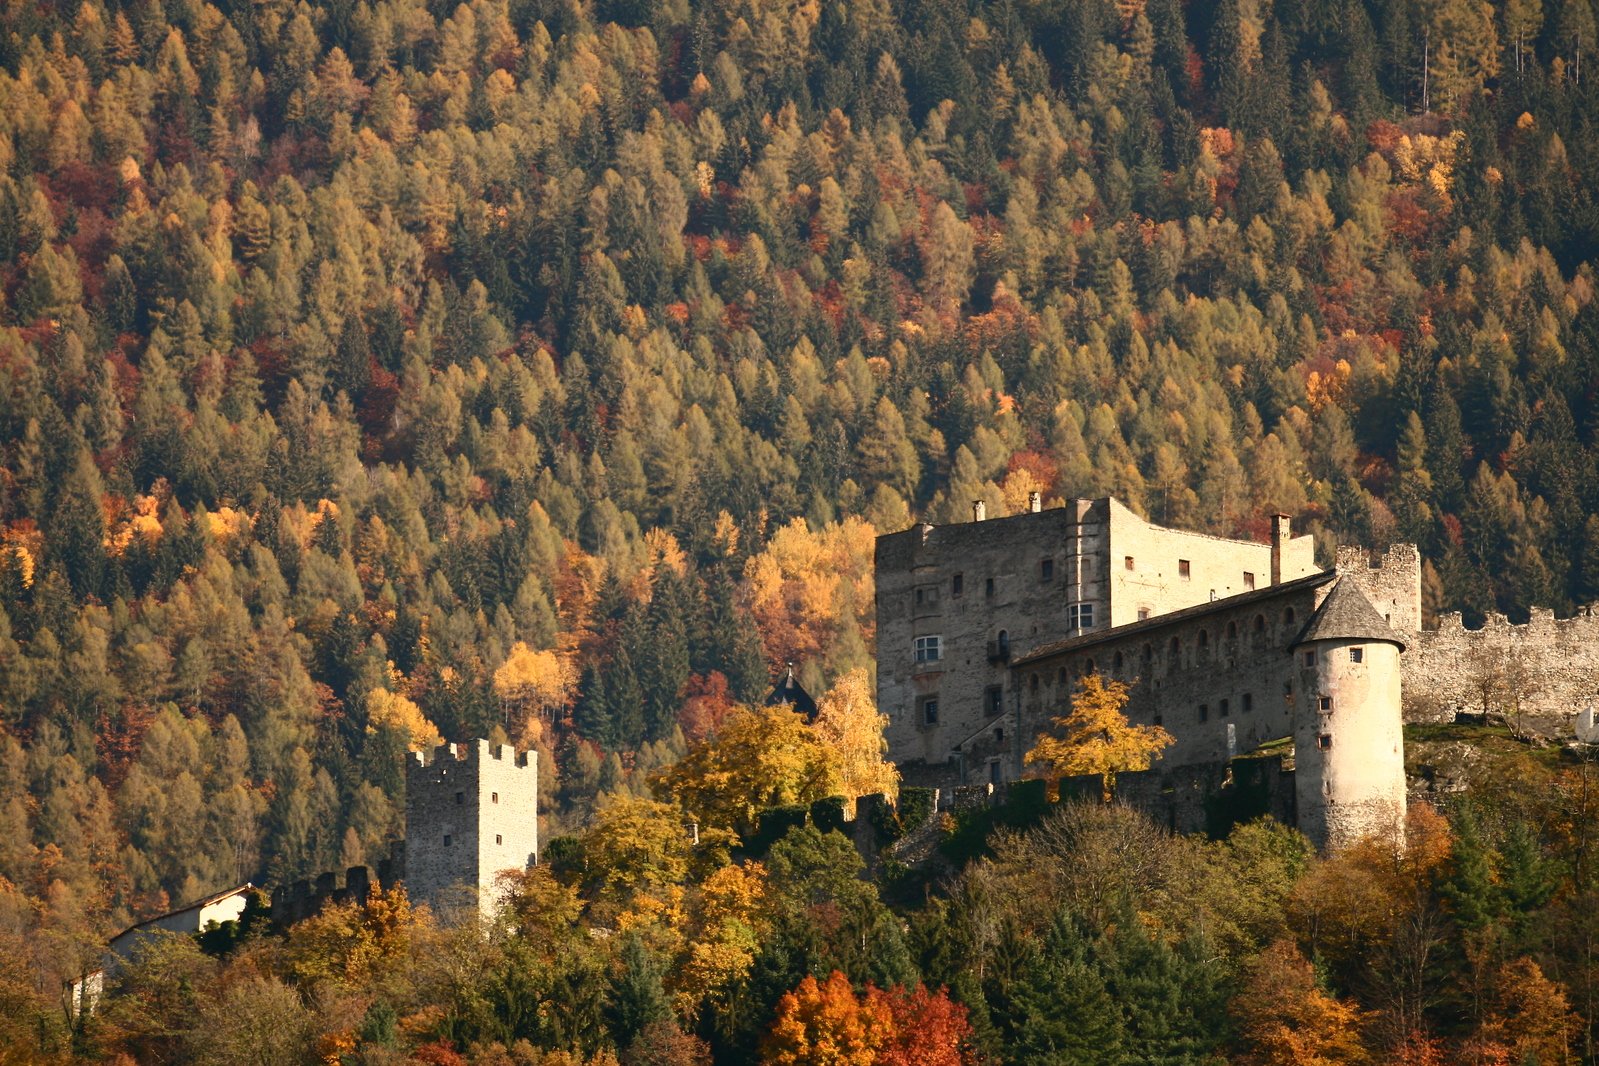 an old castle sitting on top of a hill near a forest